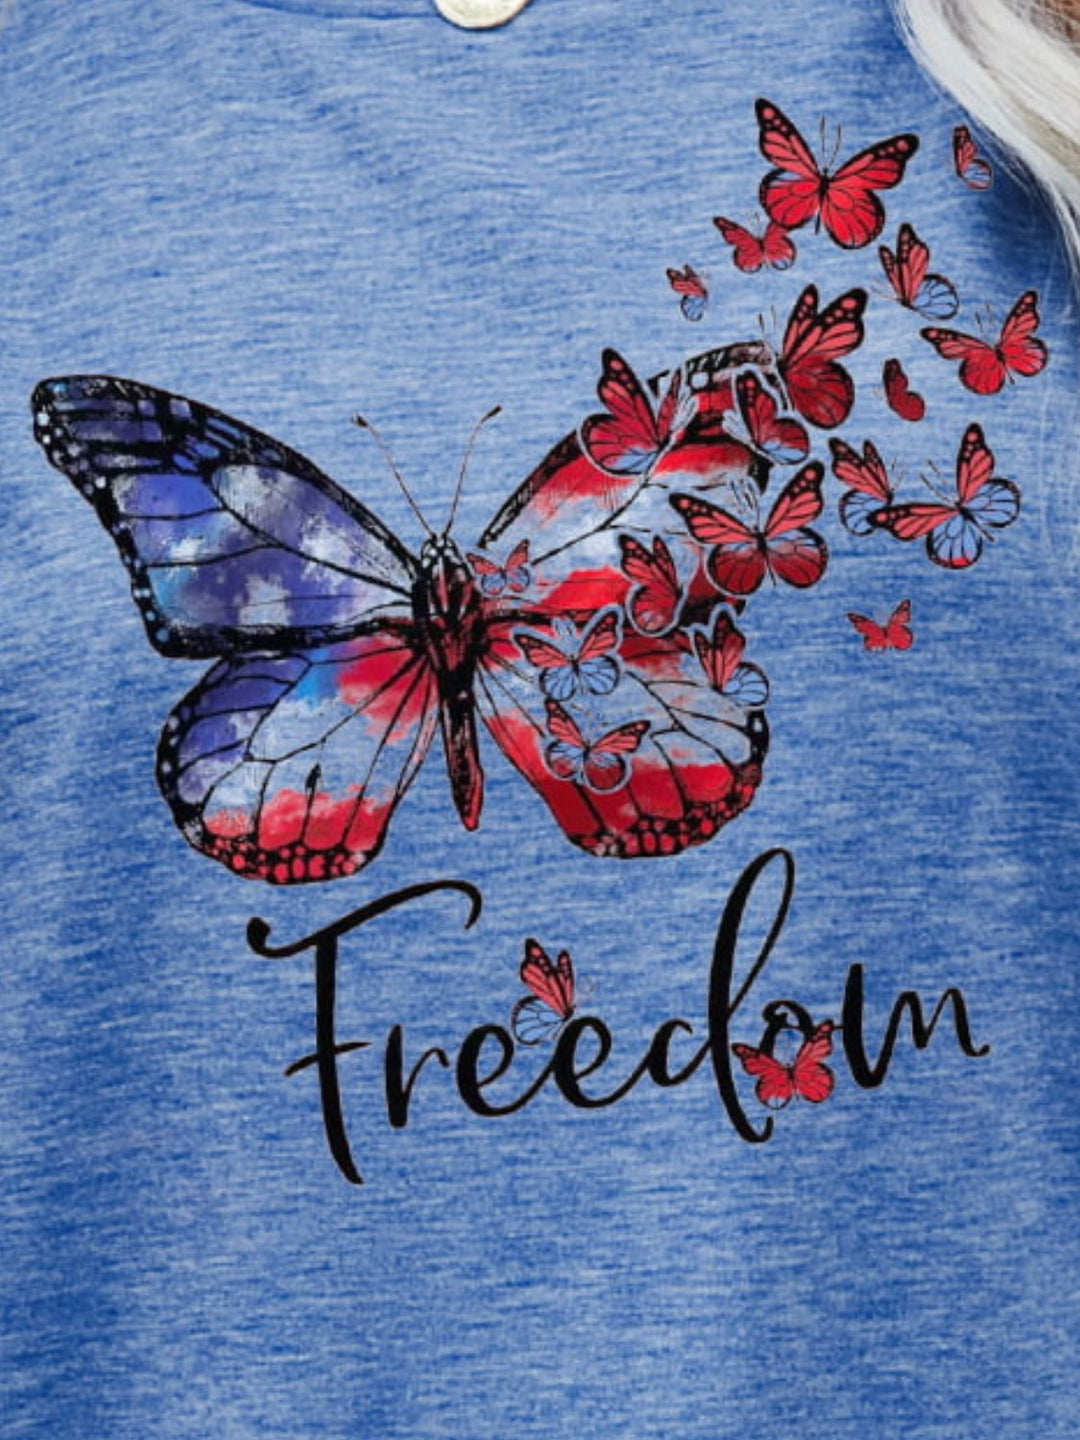 FREEDOM Butterfly Graphic Short Sleeve Tee Ti Amo I love you